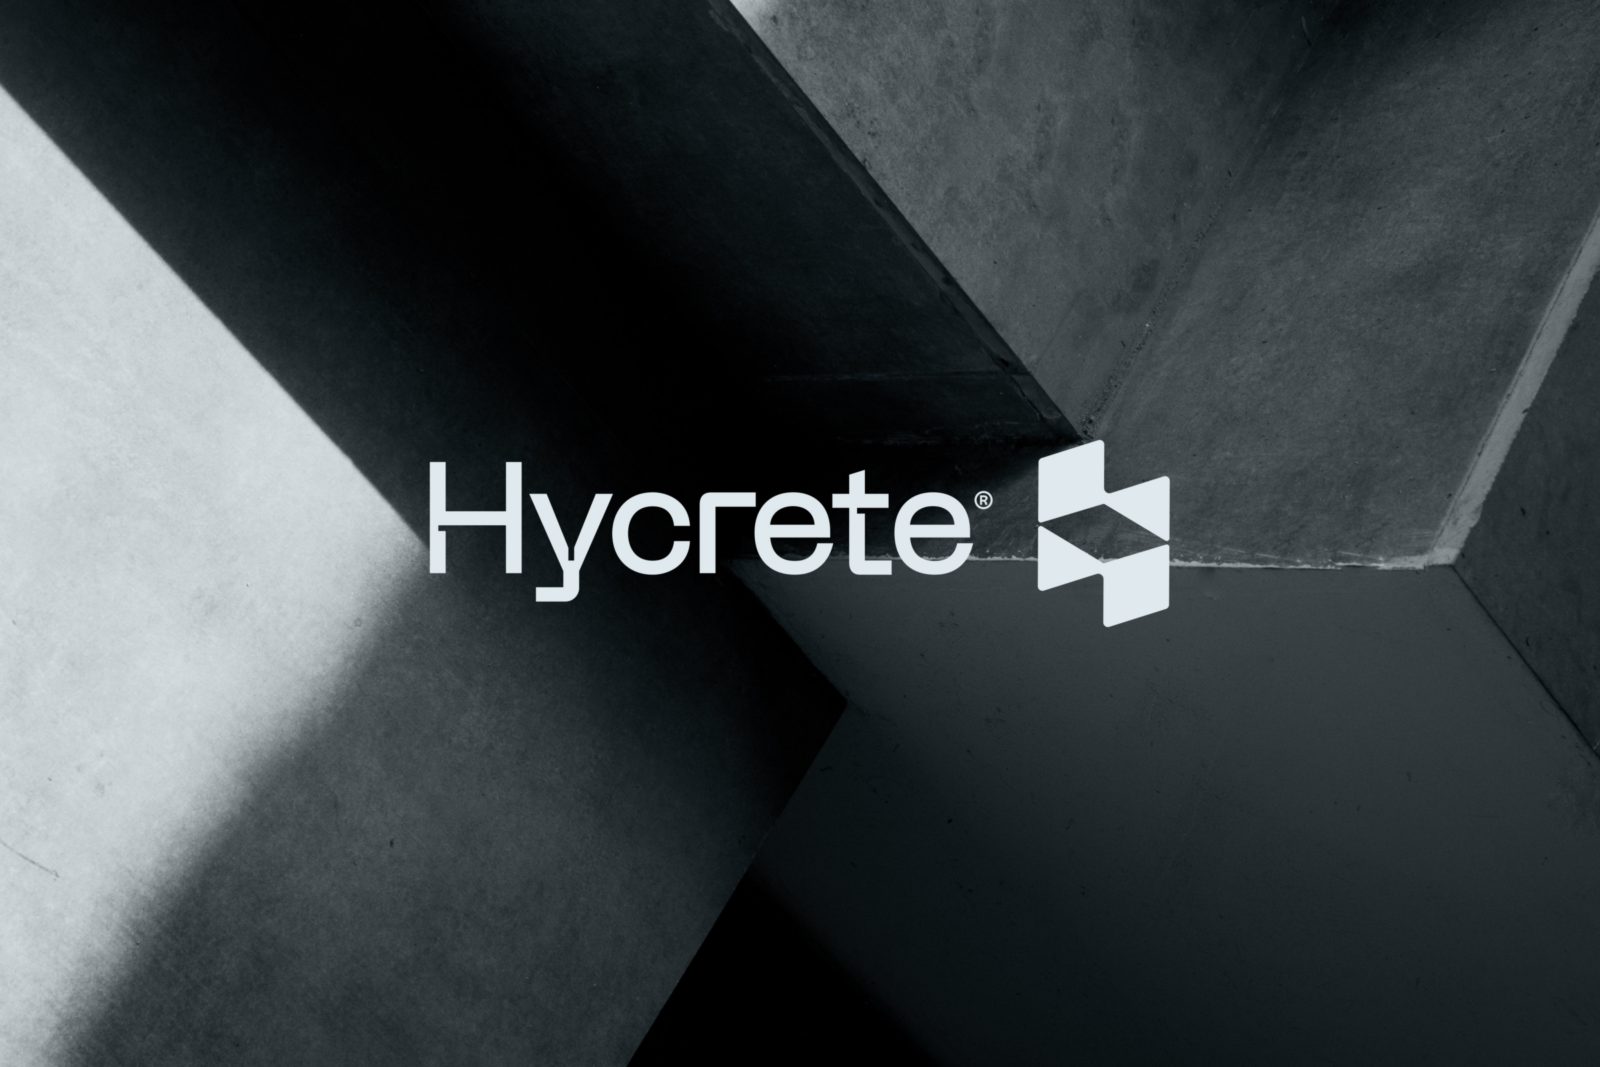 Brand Redesign for Hycrete